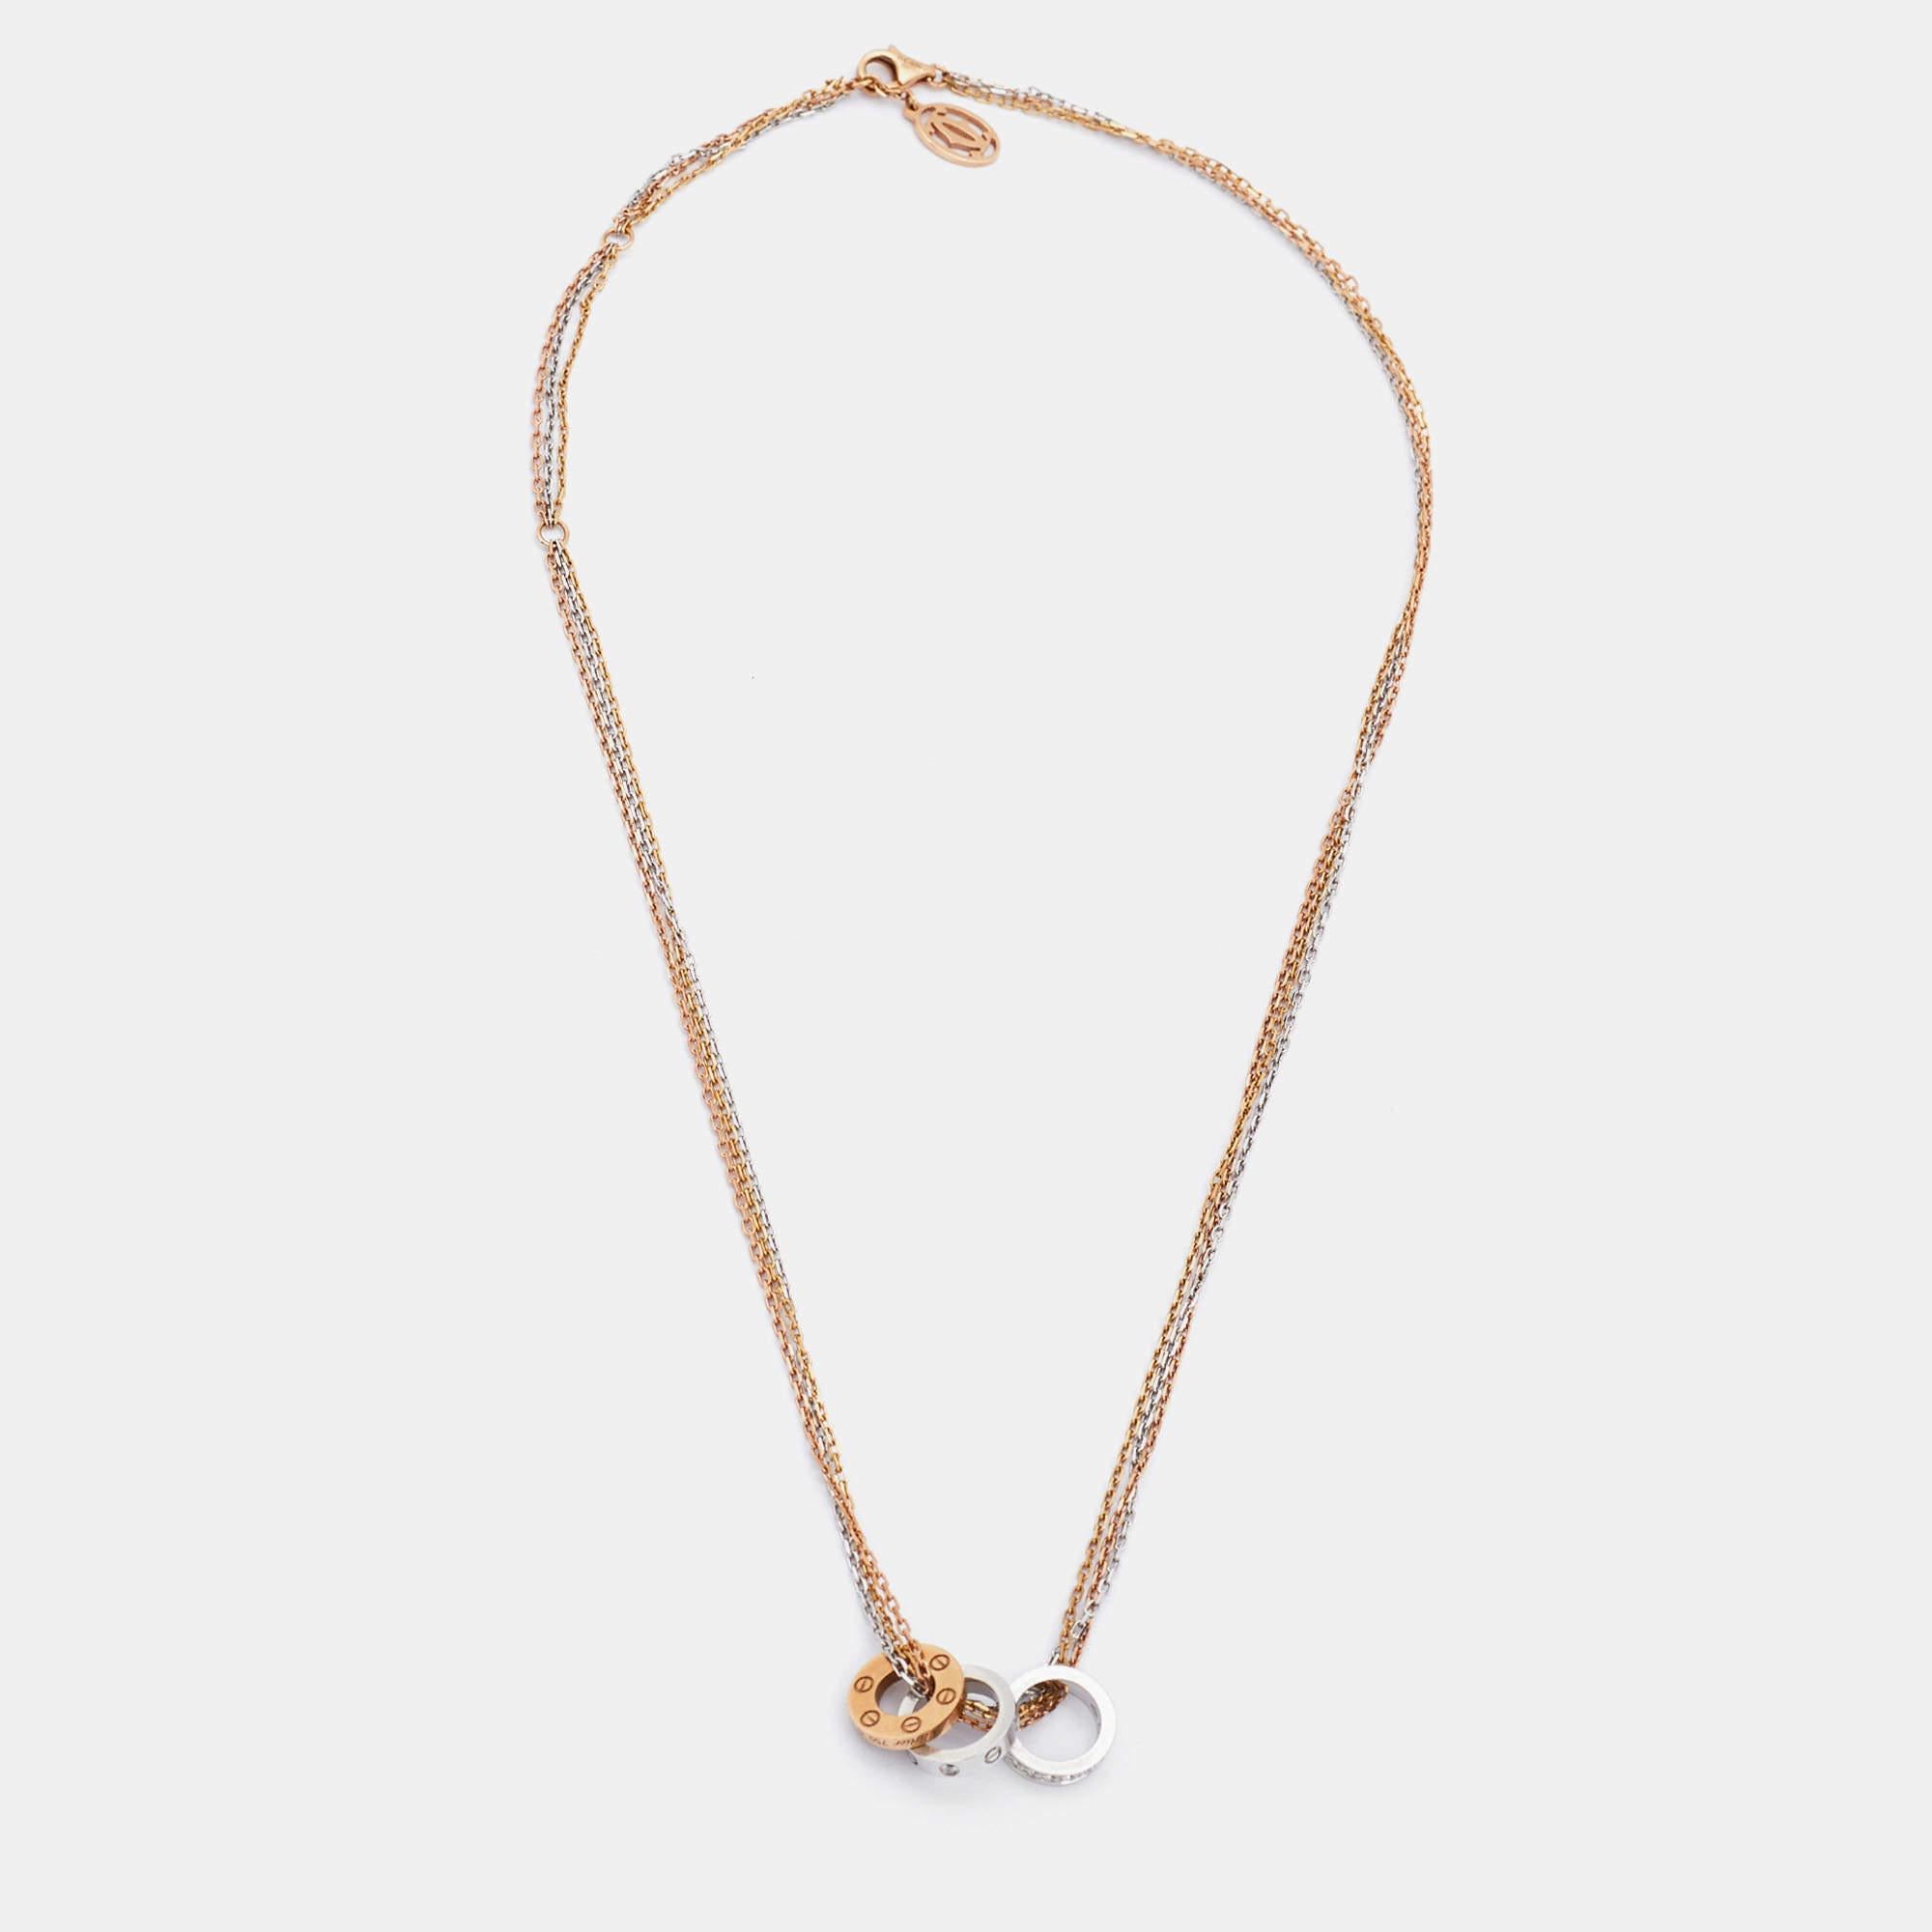 The LOVE collection is an iconic symbol of love. The double chain necklace is designed with iconic screw motifs which are in a disc shape. The piece is elegant and a timeless tribute to romance. Studded with diamonds, the Love necklace is crafted in